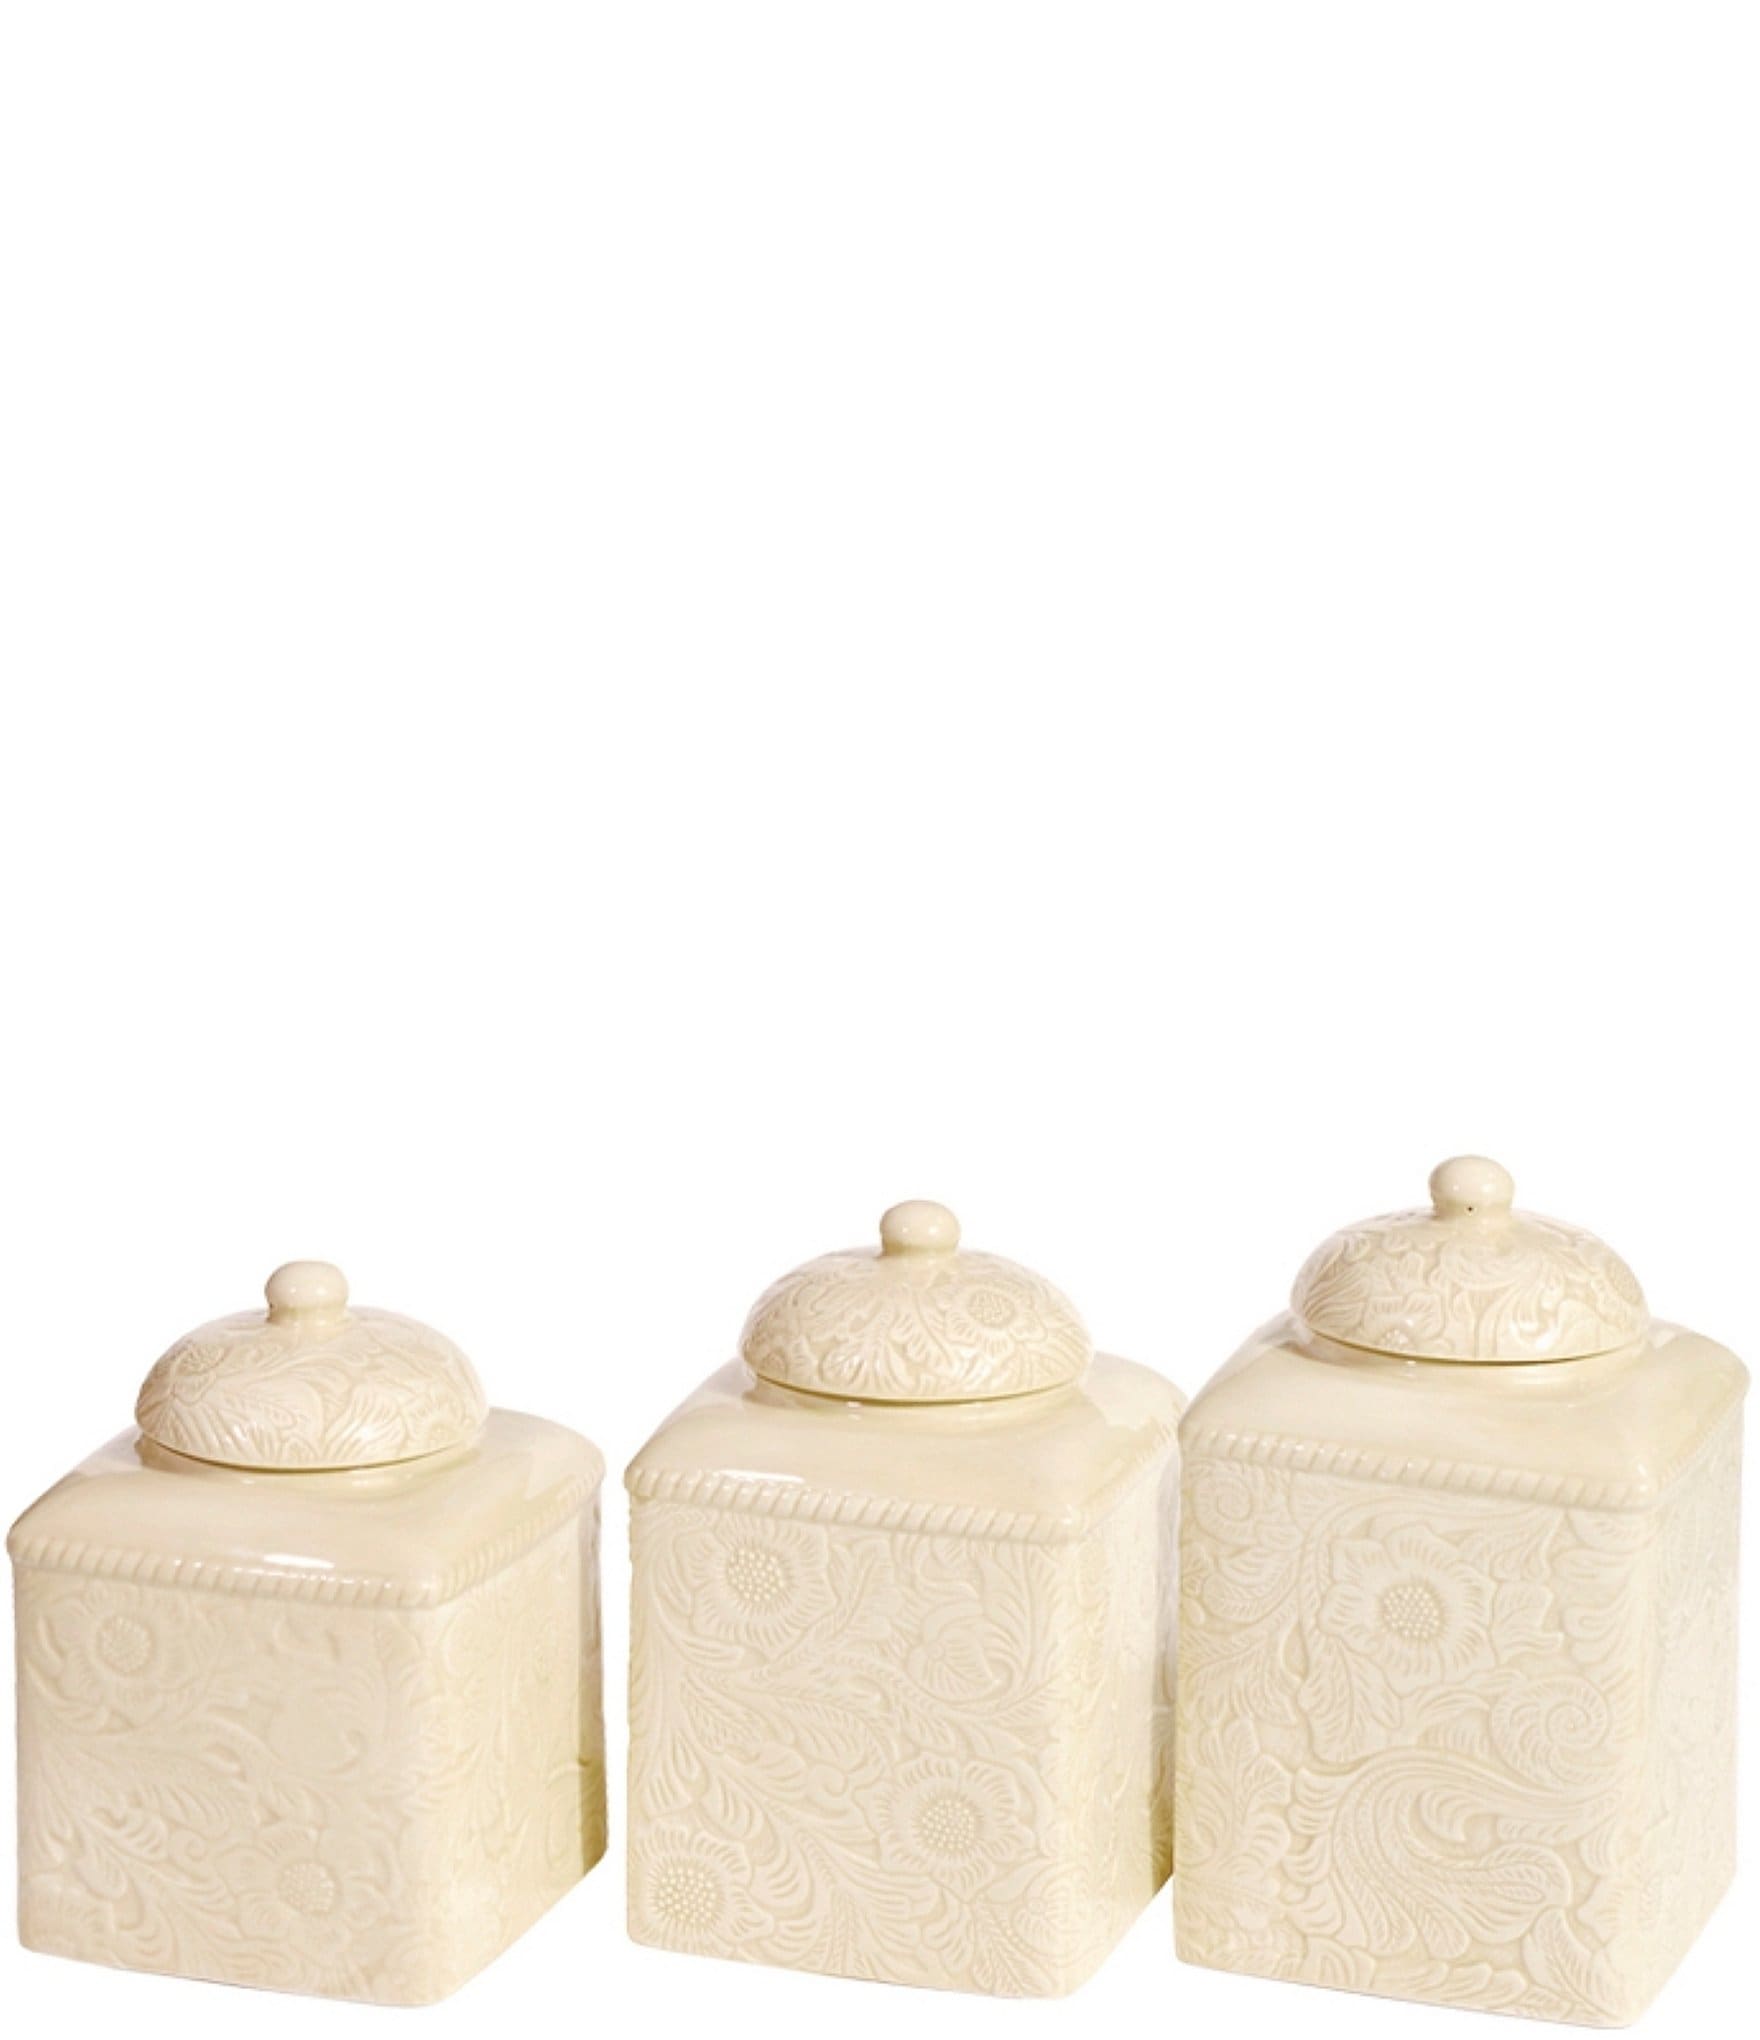 HiEnd Accents Savannah 3-Piece Canister Set; Red